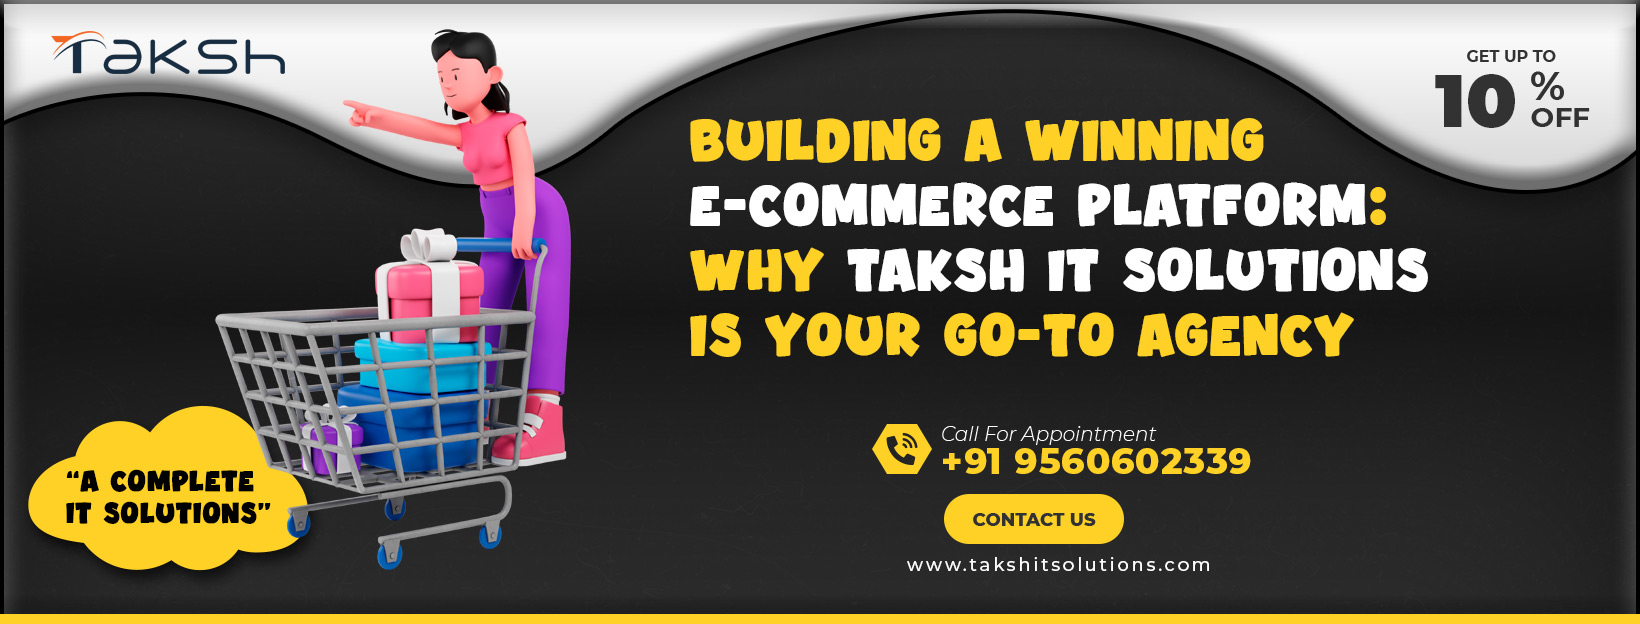 E-commerce Software Development Agency || Taksh It Solutions Private Limited